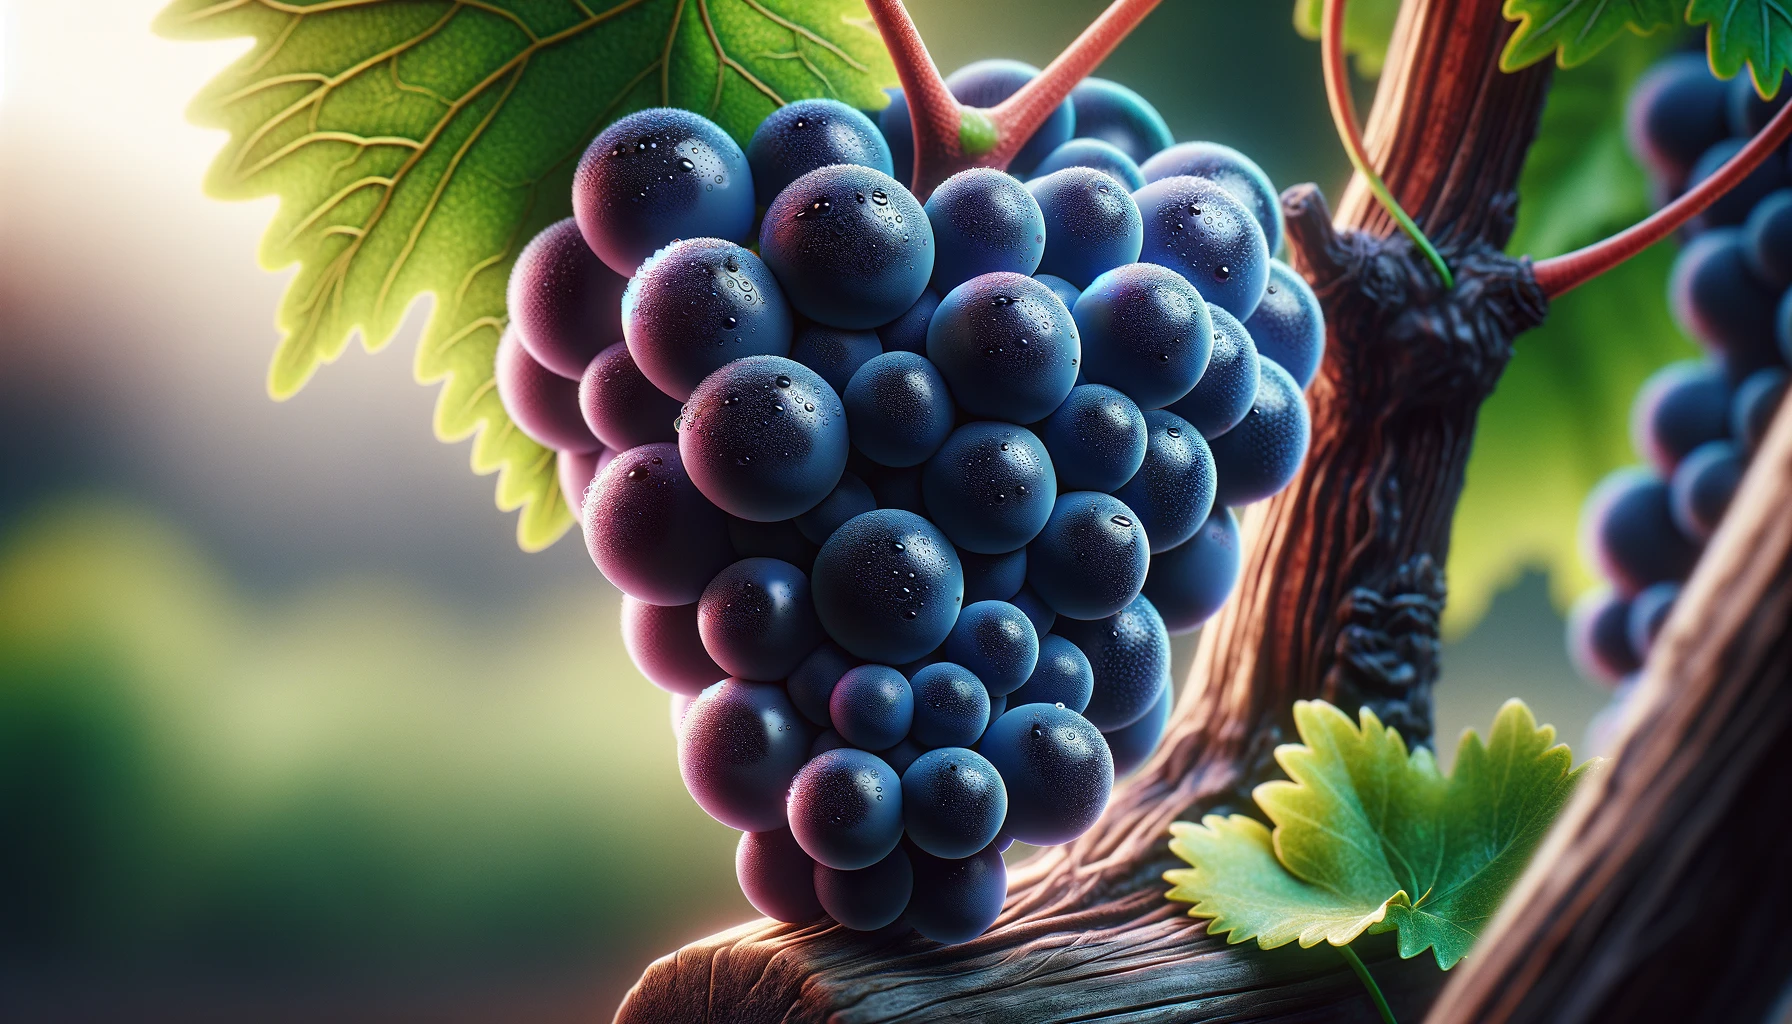 DALL·E 2024-05-23 11.00.51 - Close-up, photorealistic stock image of Dolcetto grapes, focusing on a cluster of ripe Dolcetto grapes with deep, dark blue to purple skins, attached